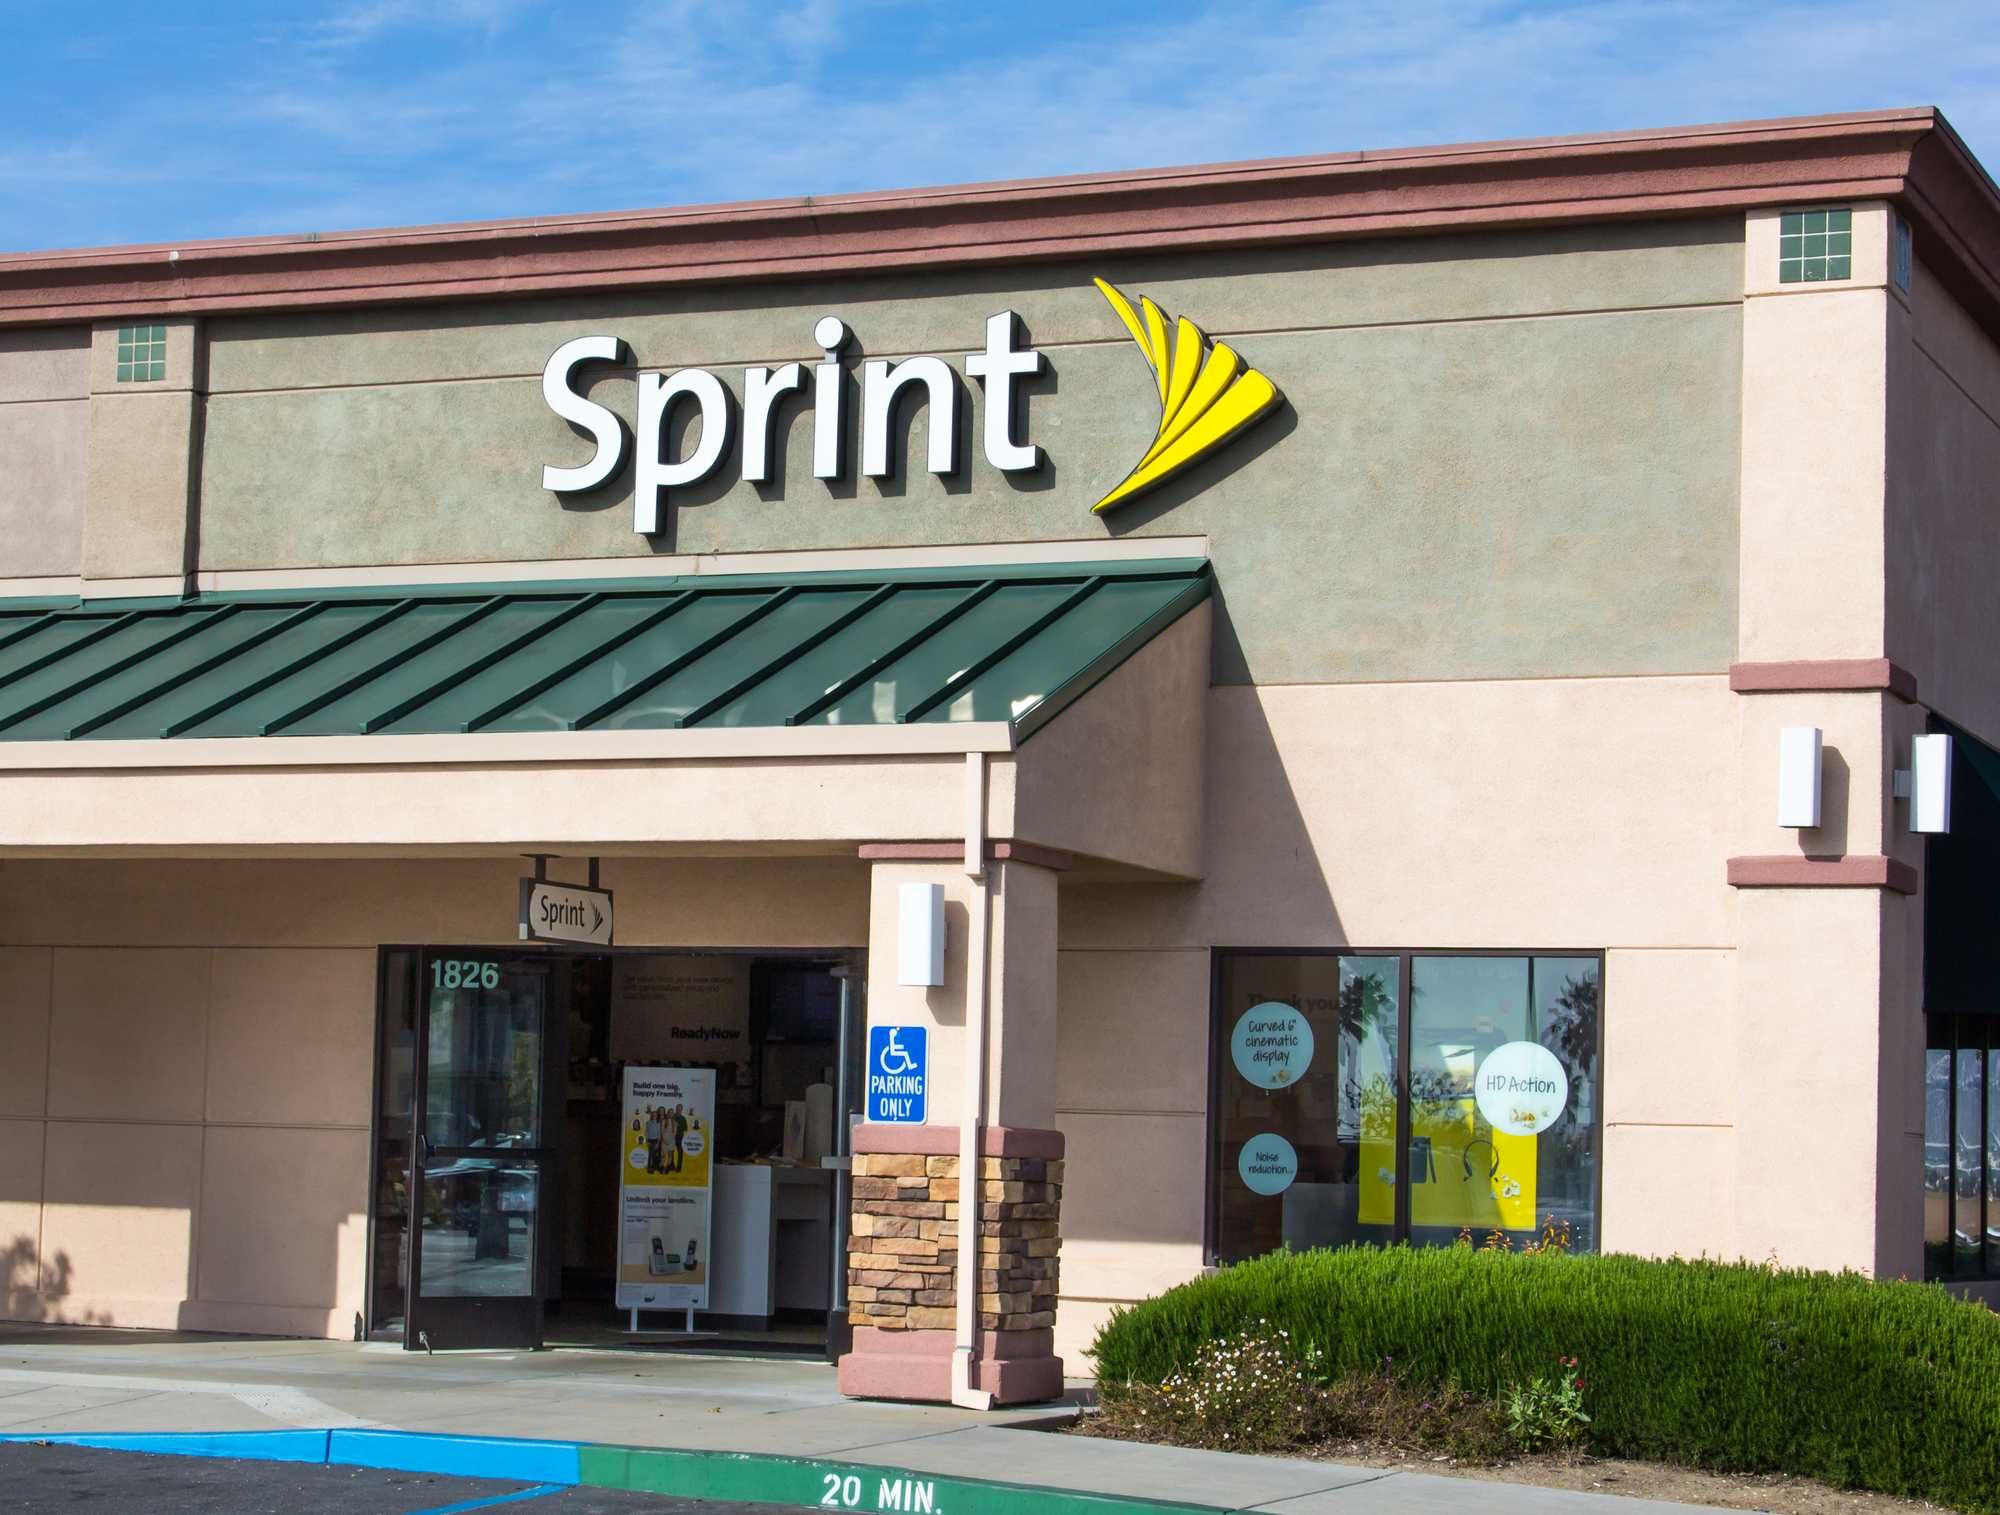 Sprint Phone Lease Plans Trap Customers in Endless Contracts, Class Action lawsuit Alleges